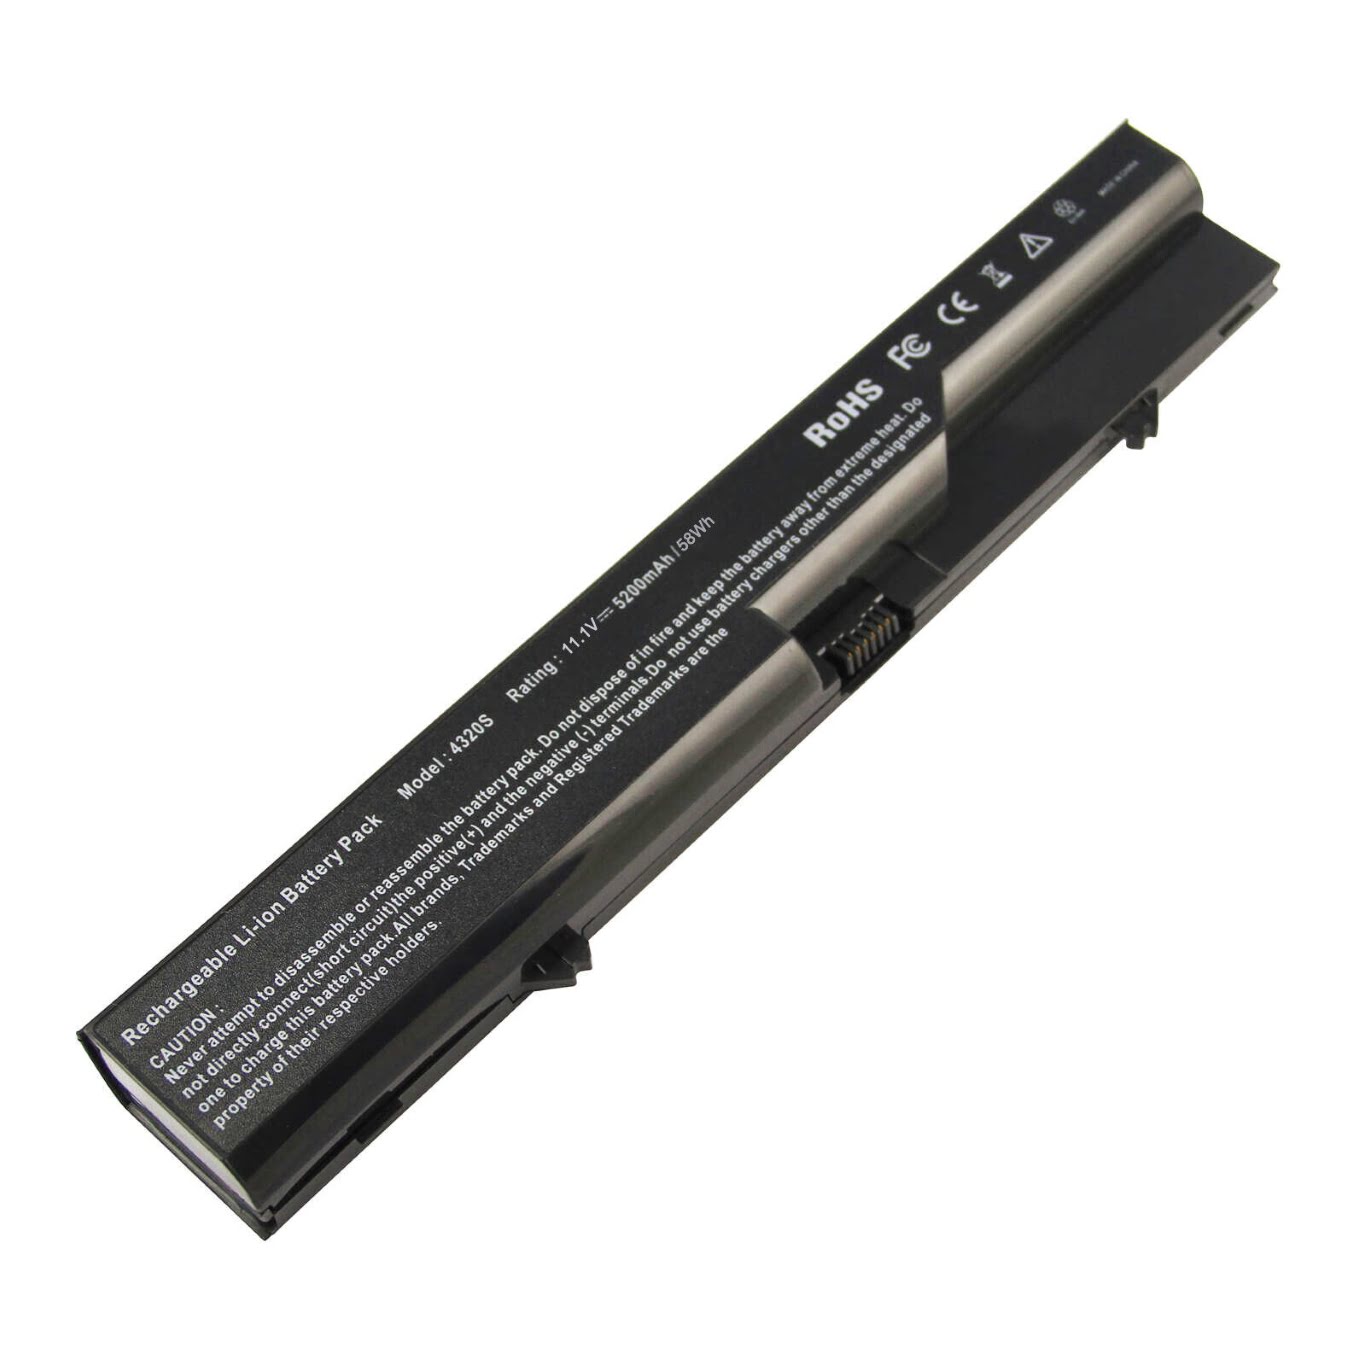 Hp 587706-121, 587706-131 Laptop Batteries For 320, 321 replacement